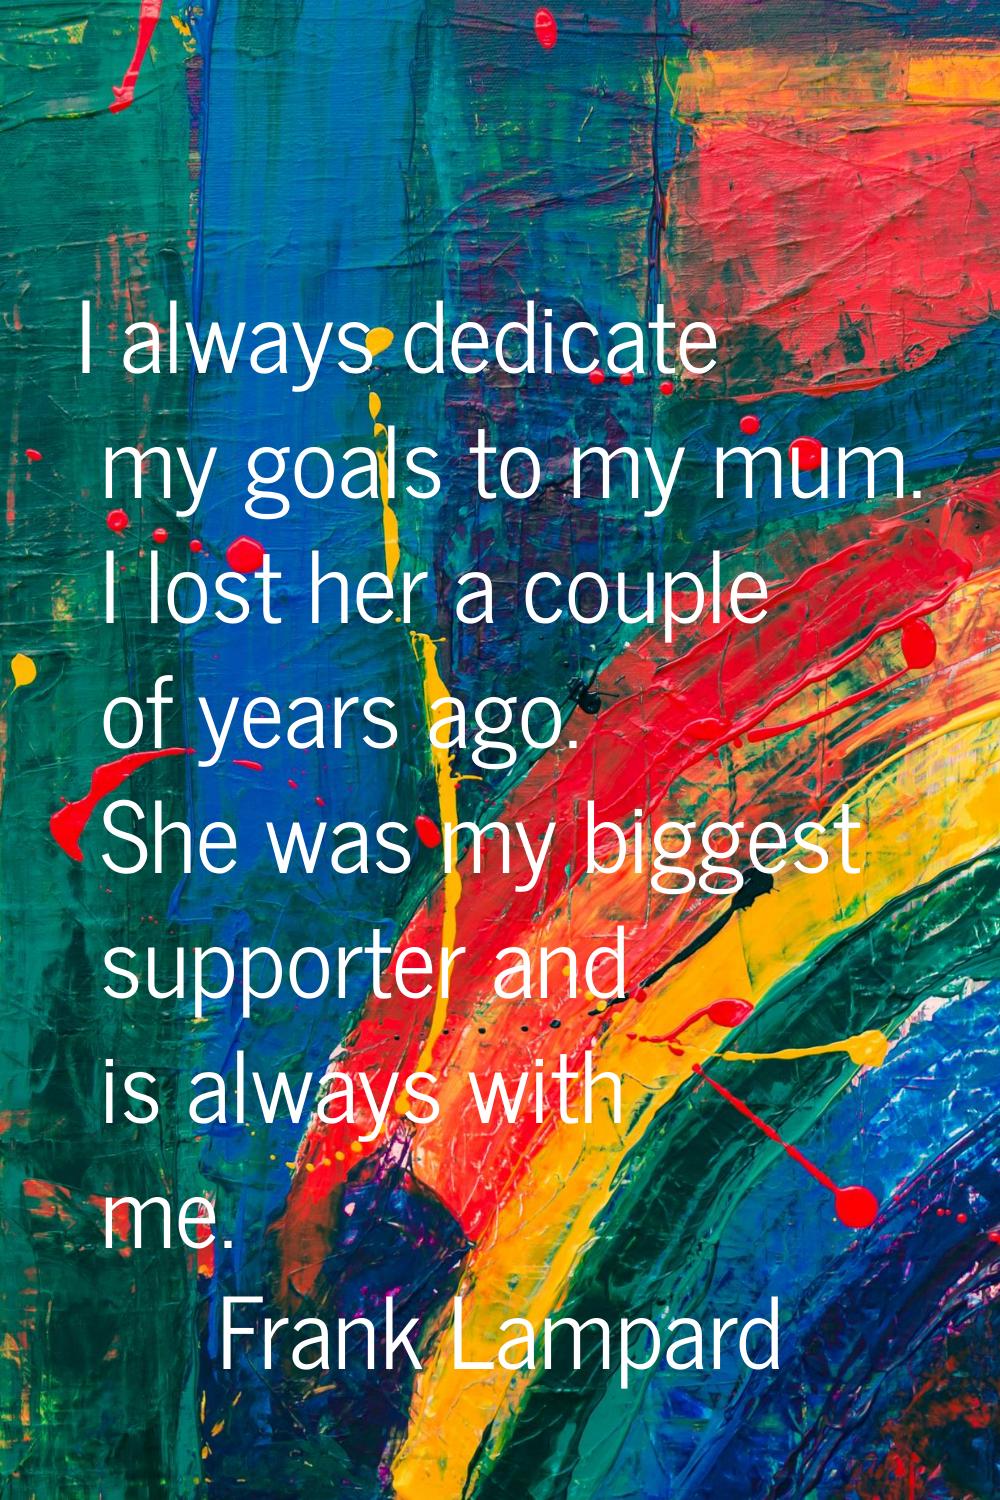 I always dedicate my goals to my mum. I lost her a couple of years ago. She was my biggest supporte